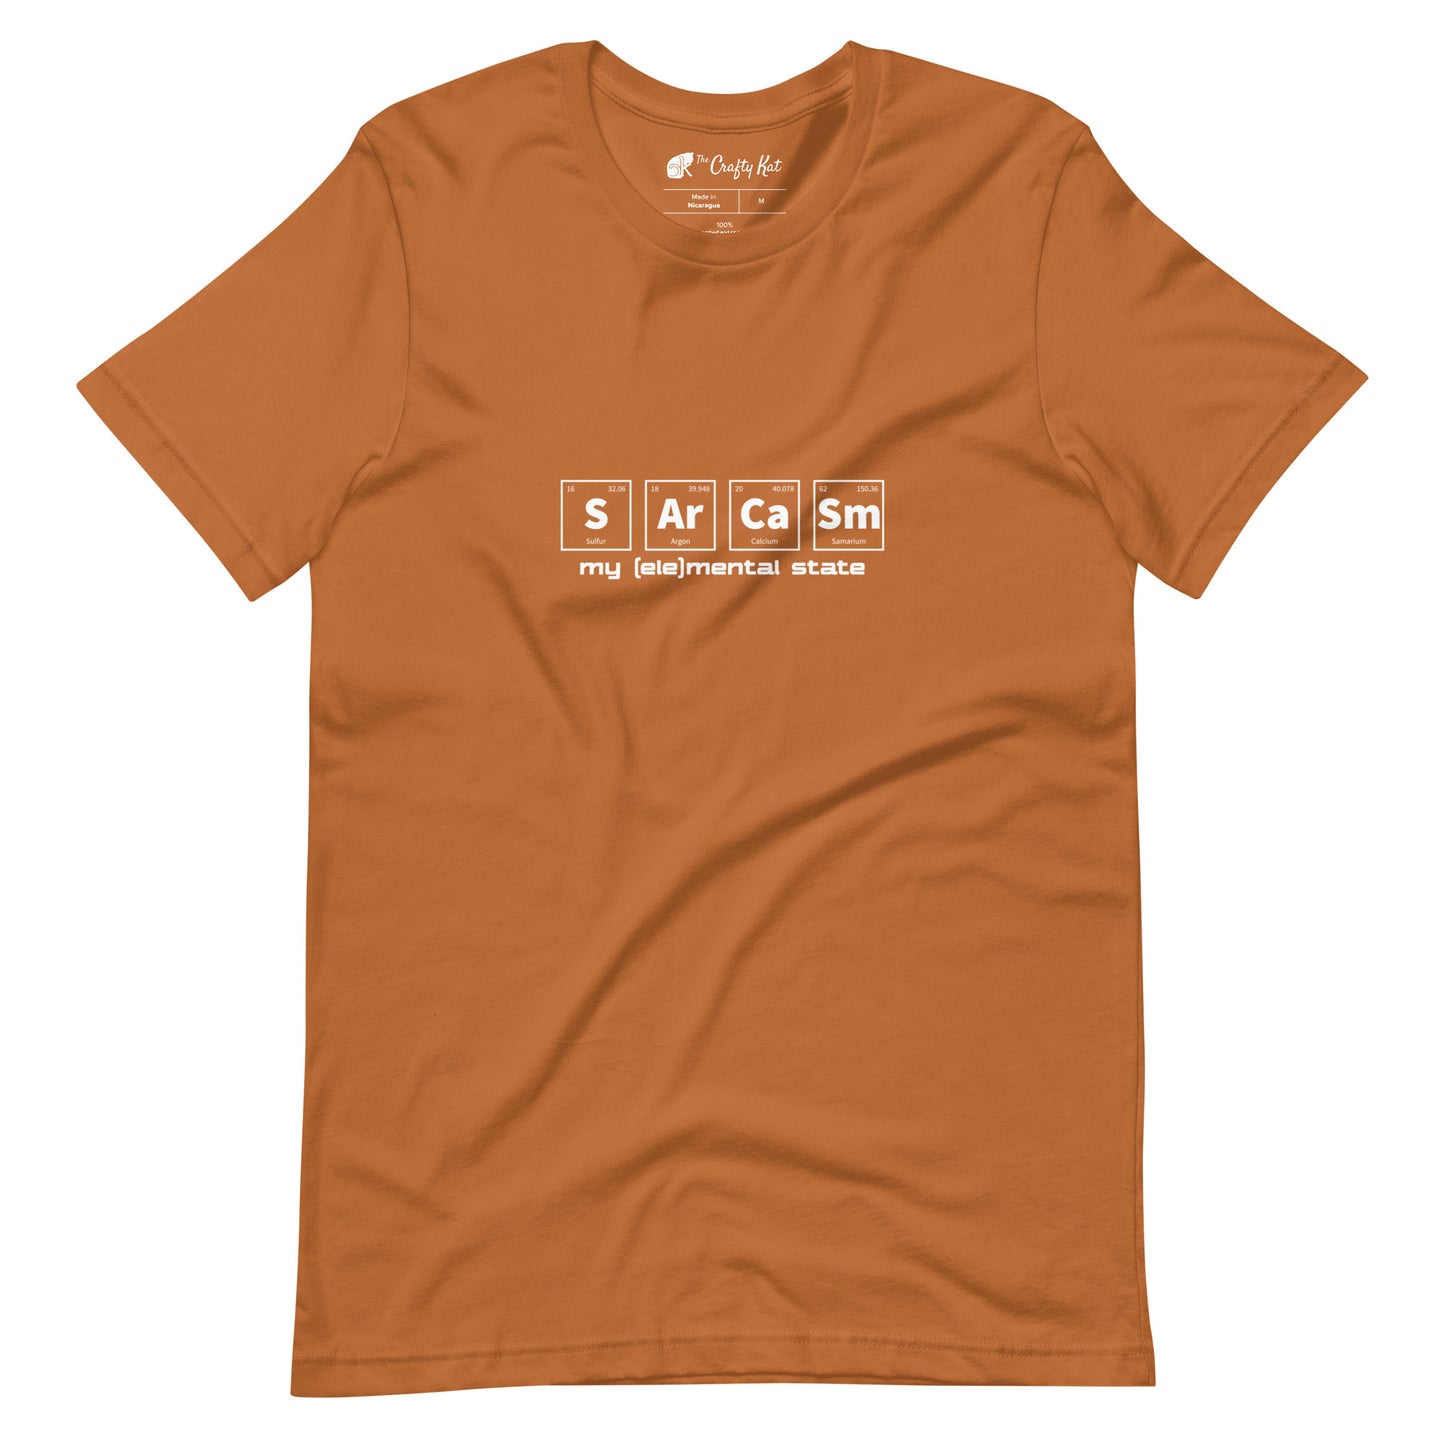 Toast (yellow orange) t-shirt with graphic of periodic table of elements symbols for Sulfur (S), Argon (Ar), Calcium (Ca), and Samarium (Sm) and text "my (ele)mental state"